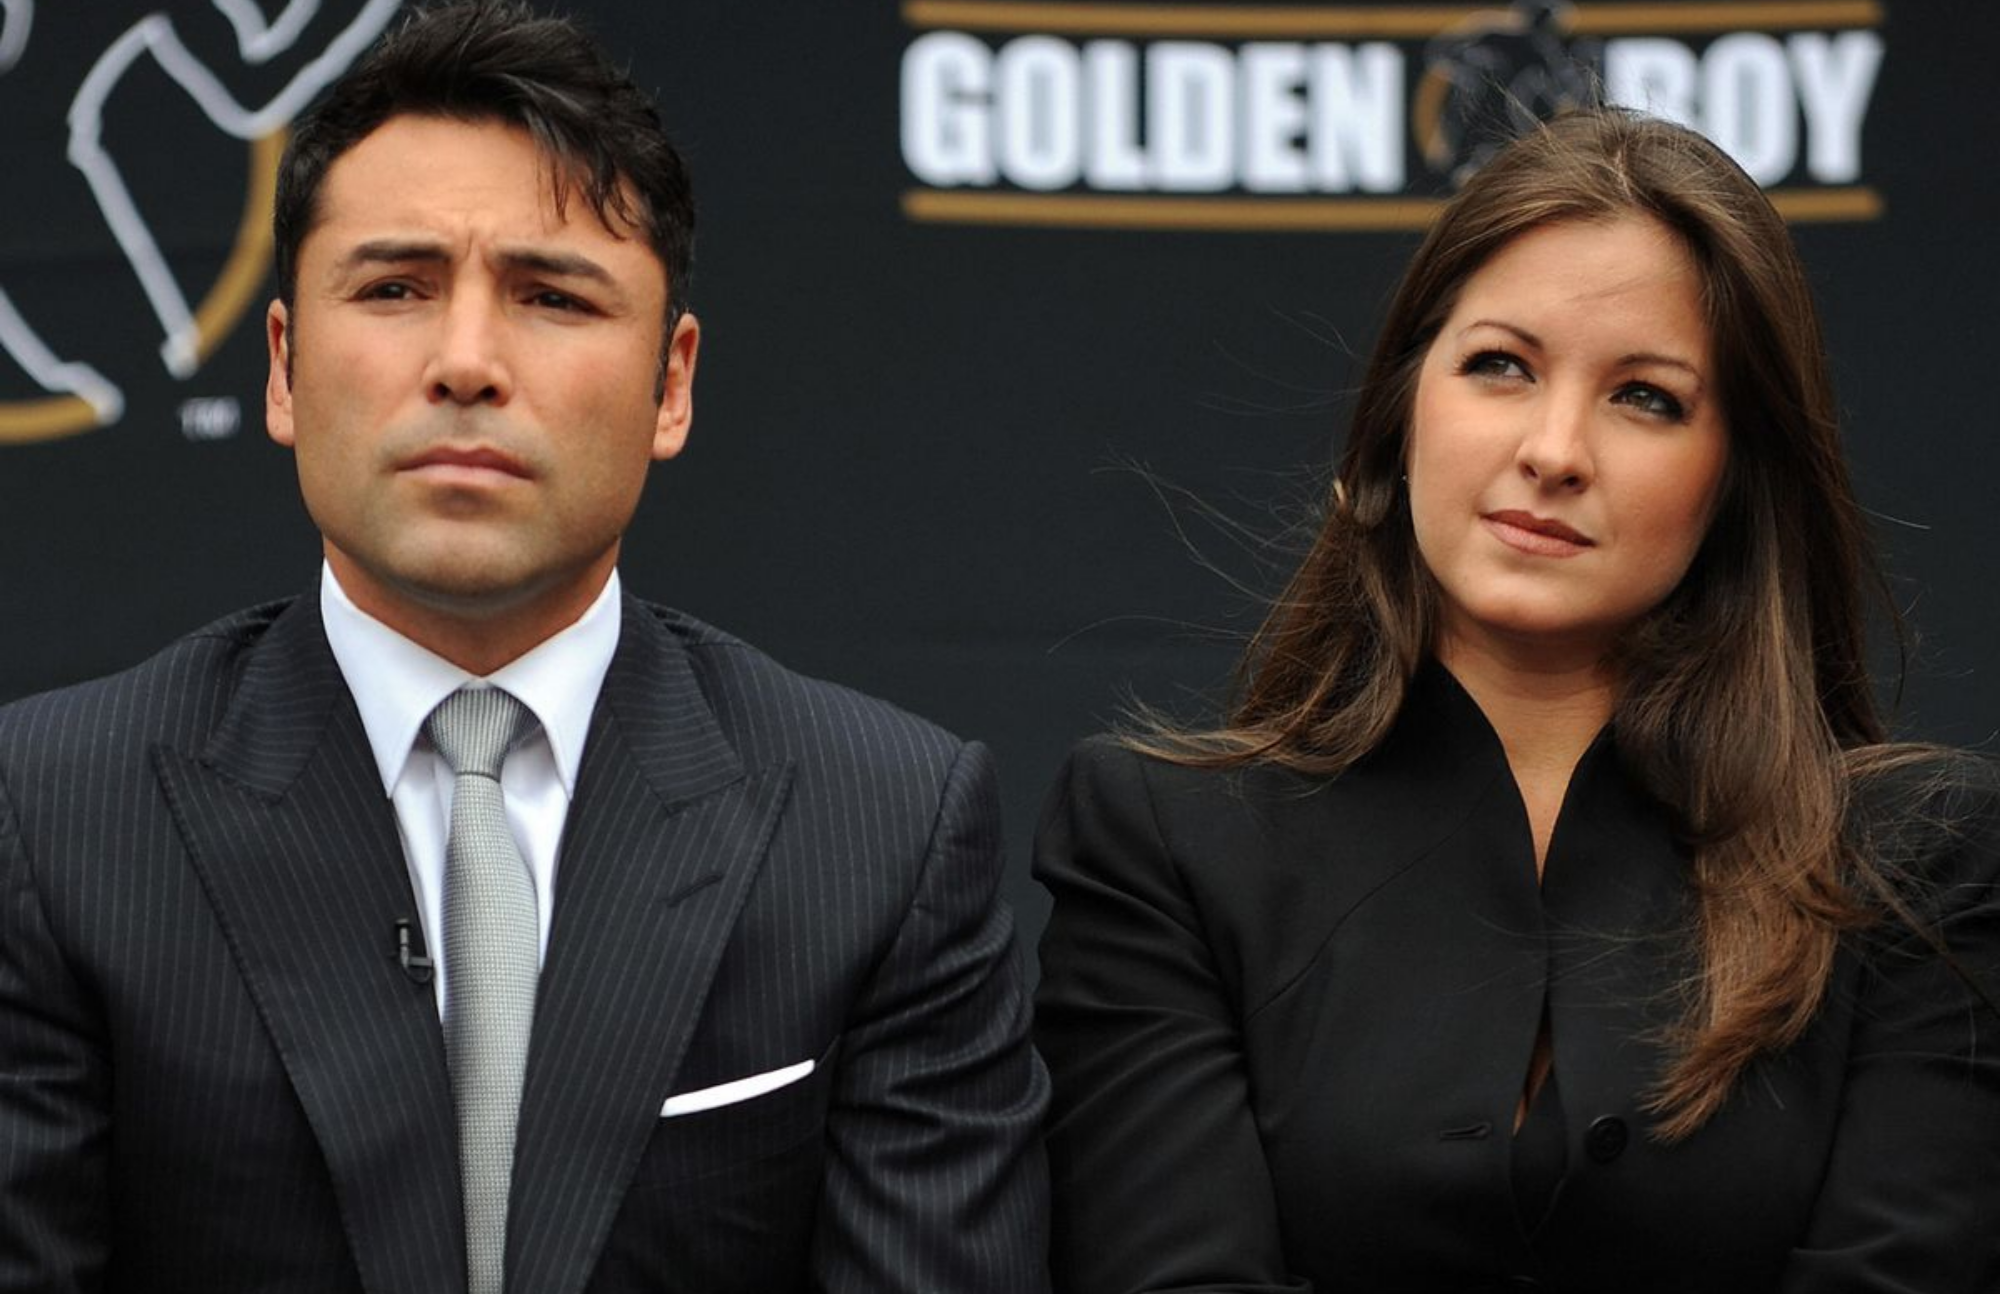 Oscar De La Hoya and his wife Millie Corretjer attend a meeting while dressed in black tops